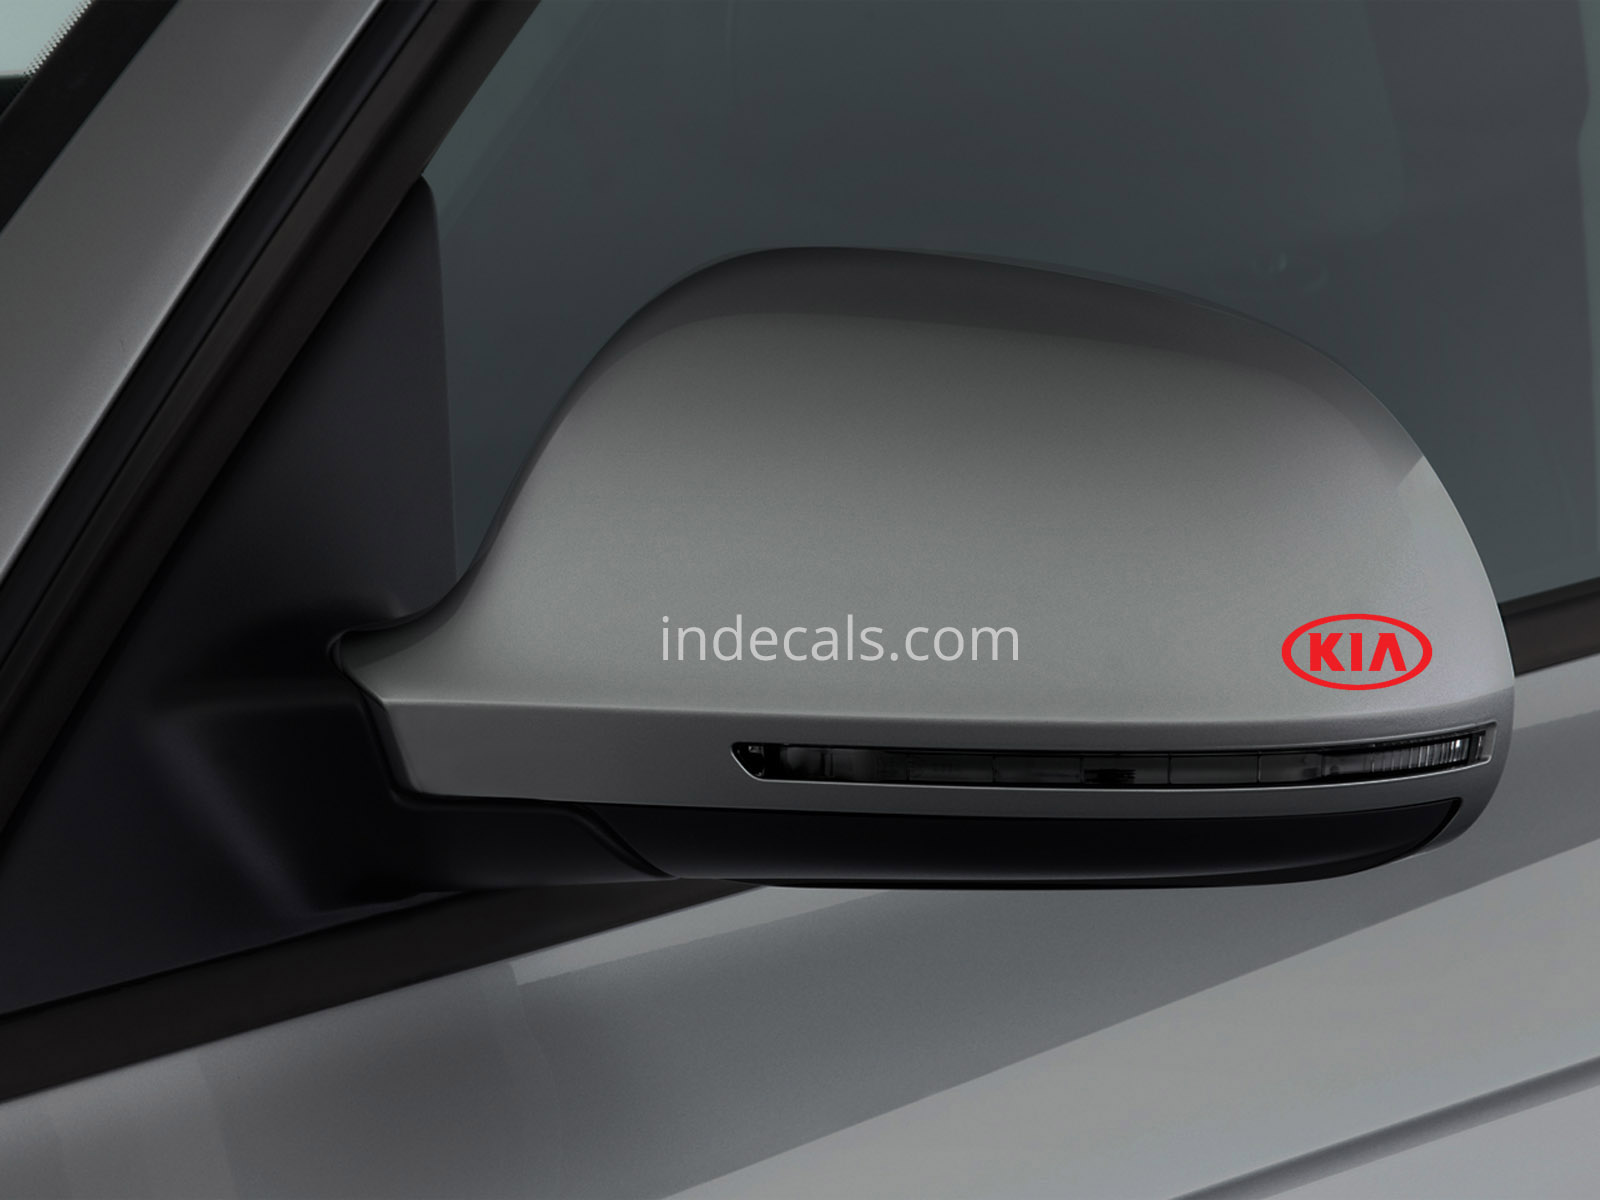 3 x KIA Stickers for Mirror Cover - Red